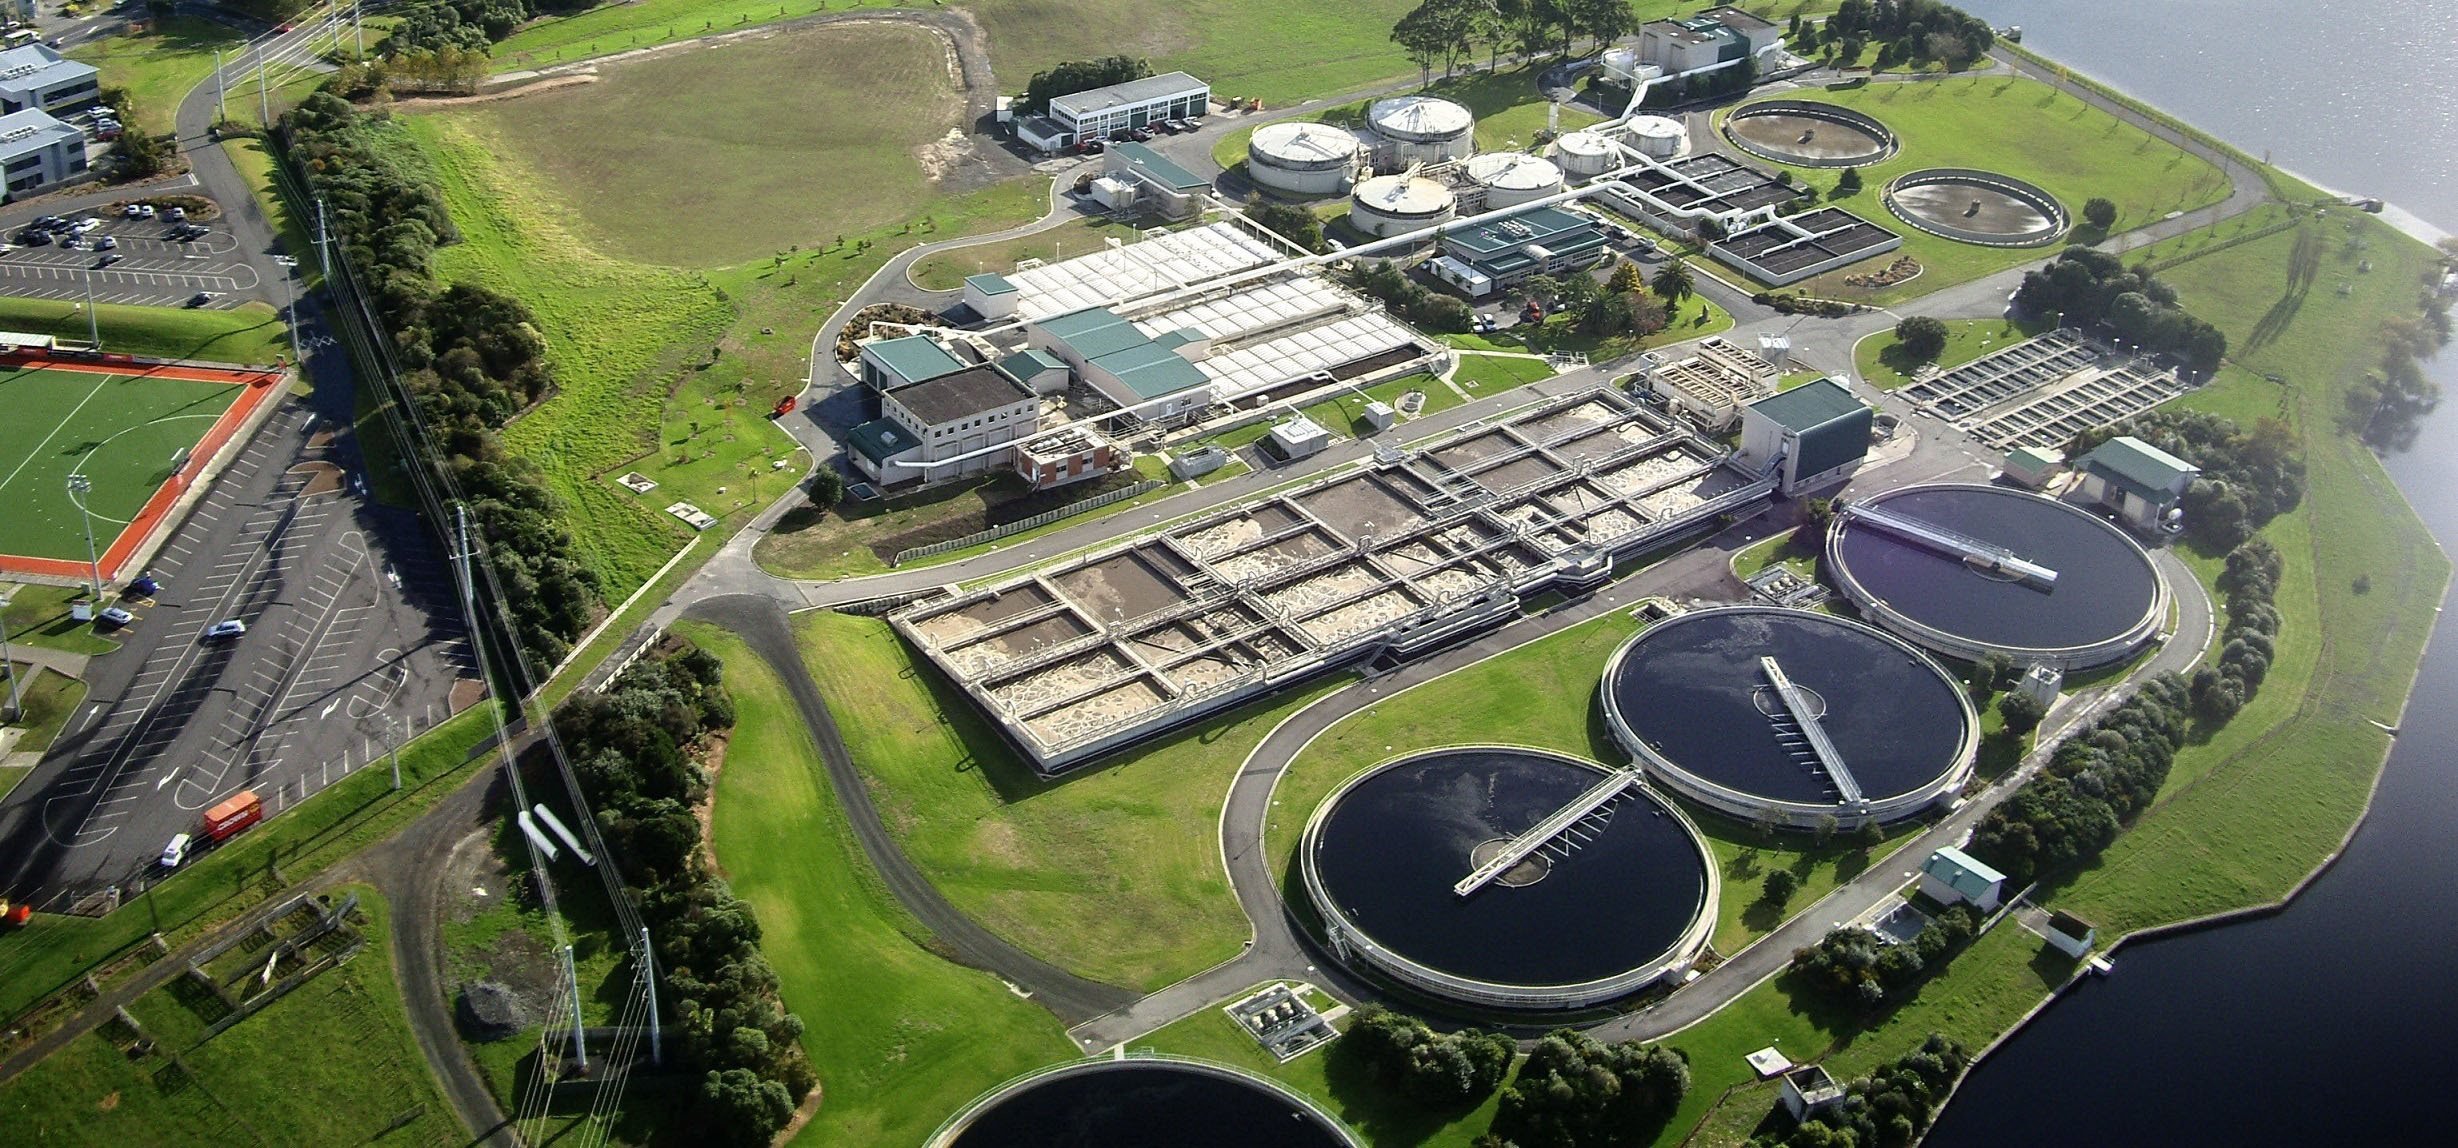 An aerial view of Rosendale wastewater treatment plant in New Zealand